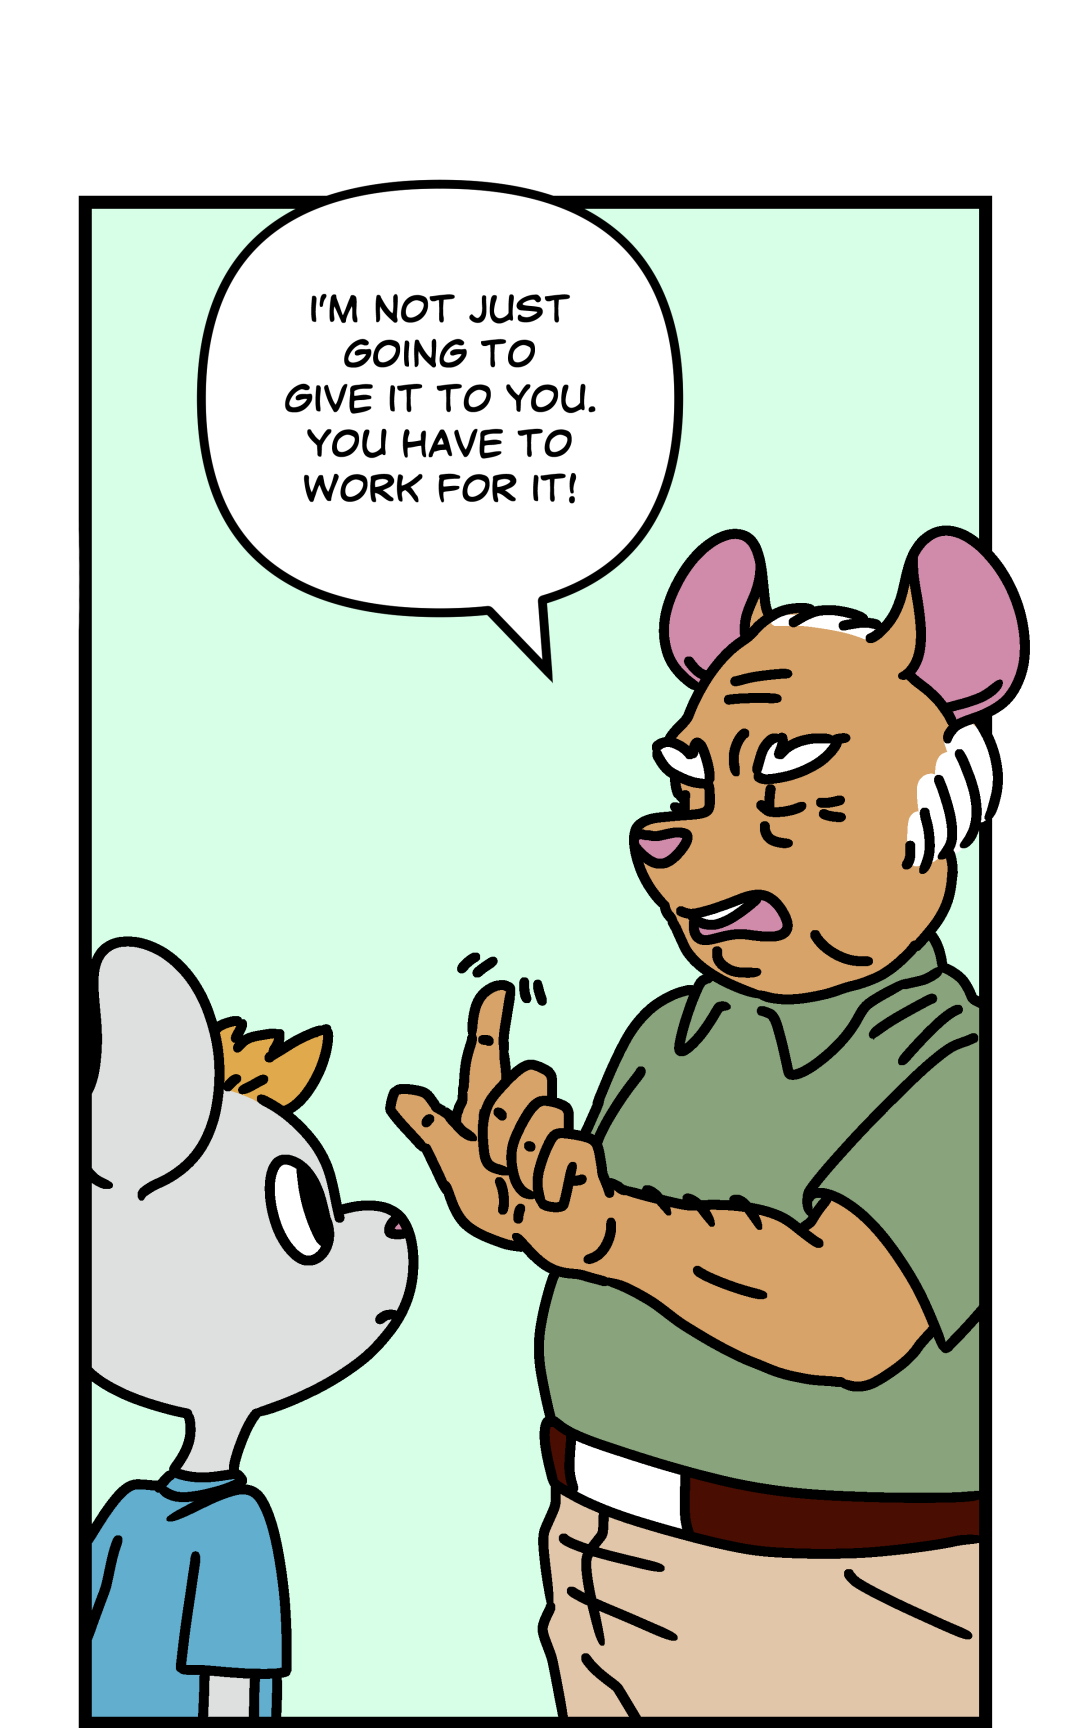 You Have to Work panel 2